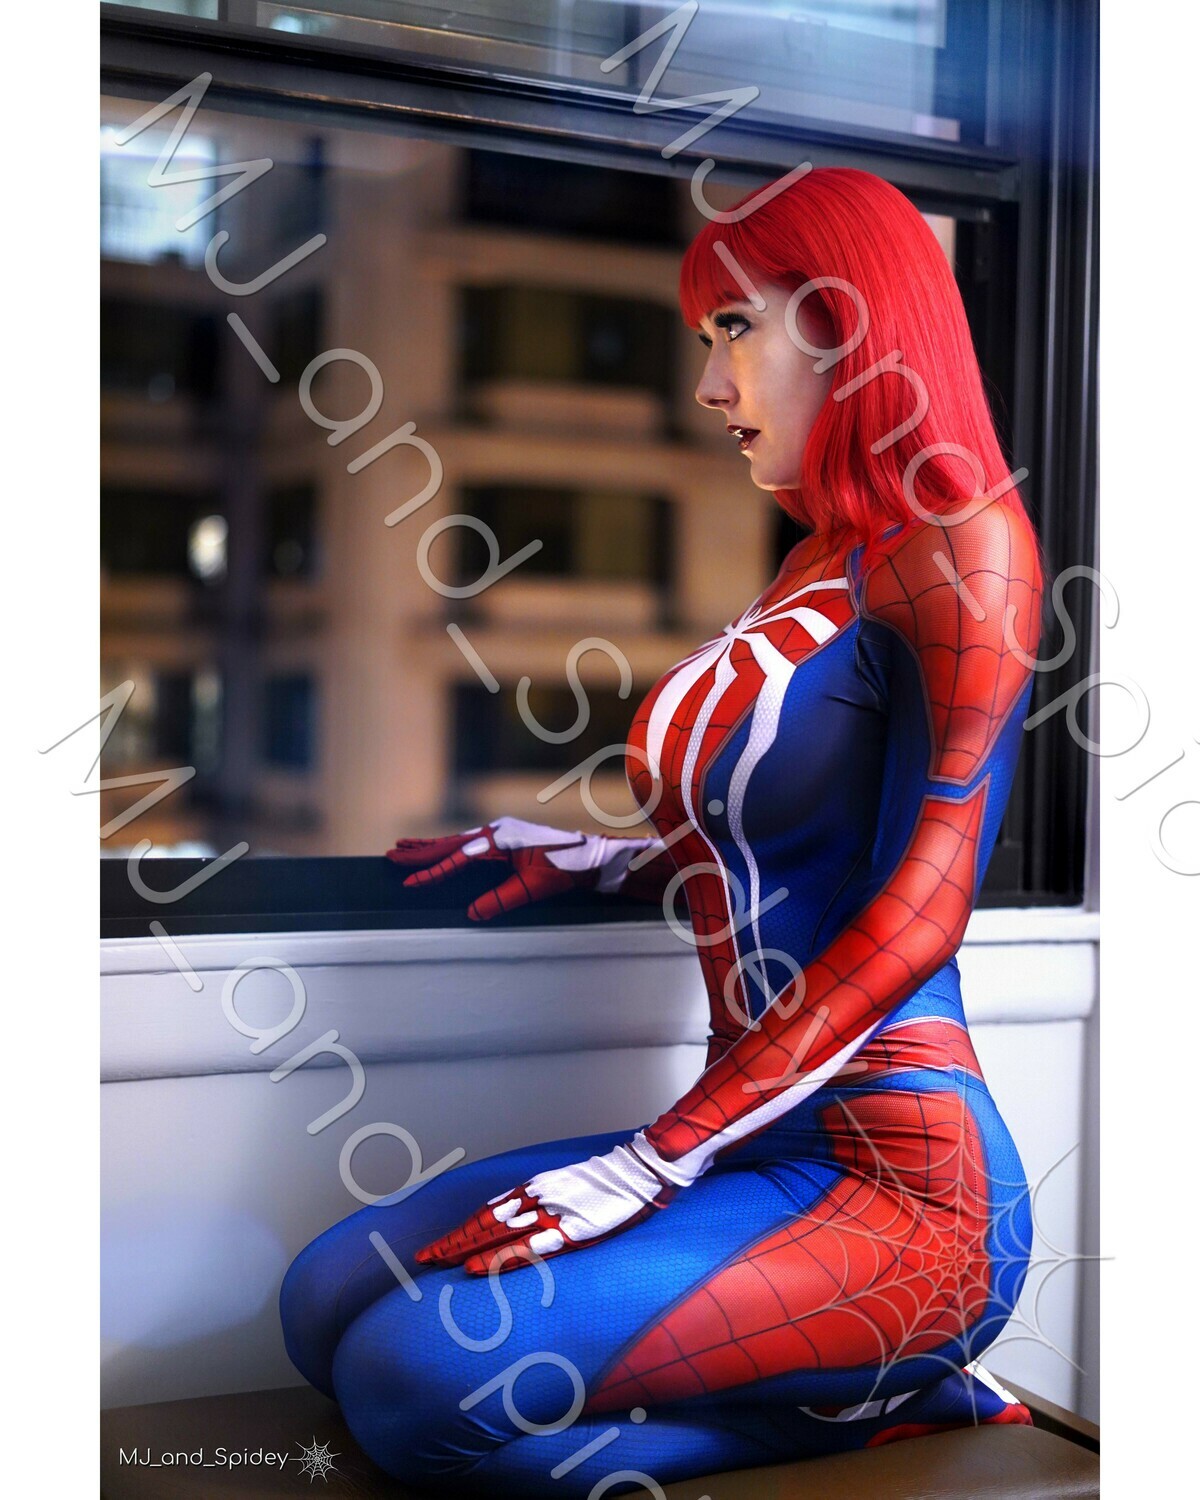 Marvel - Spider-Man - Mary Jane Watson - PS4 Insomniac Spider-Suit 1 - Digital Cosplay Image (@MJ_and_Spidey, MJ and Spidey, Comics)